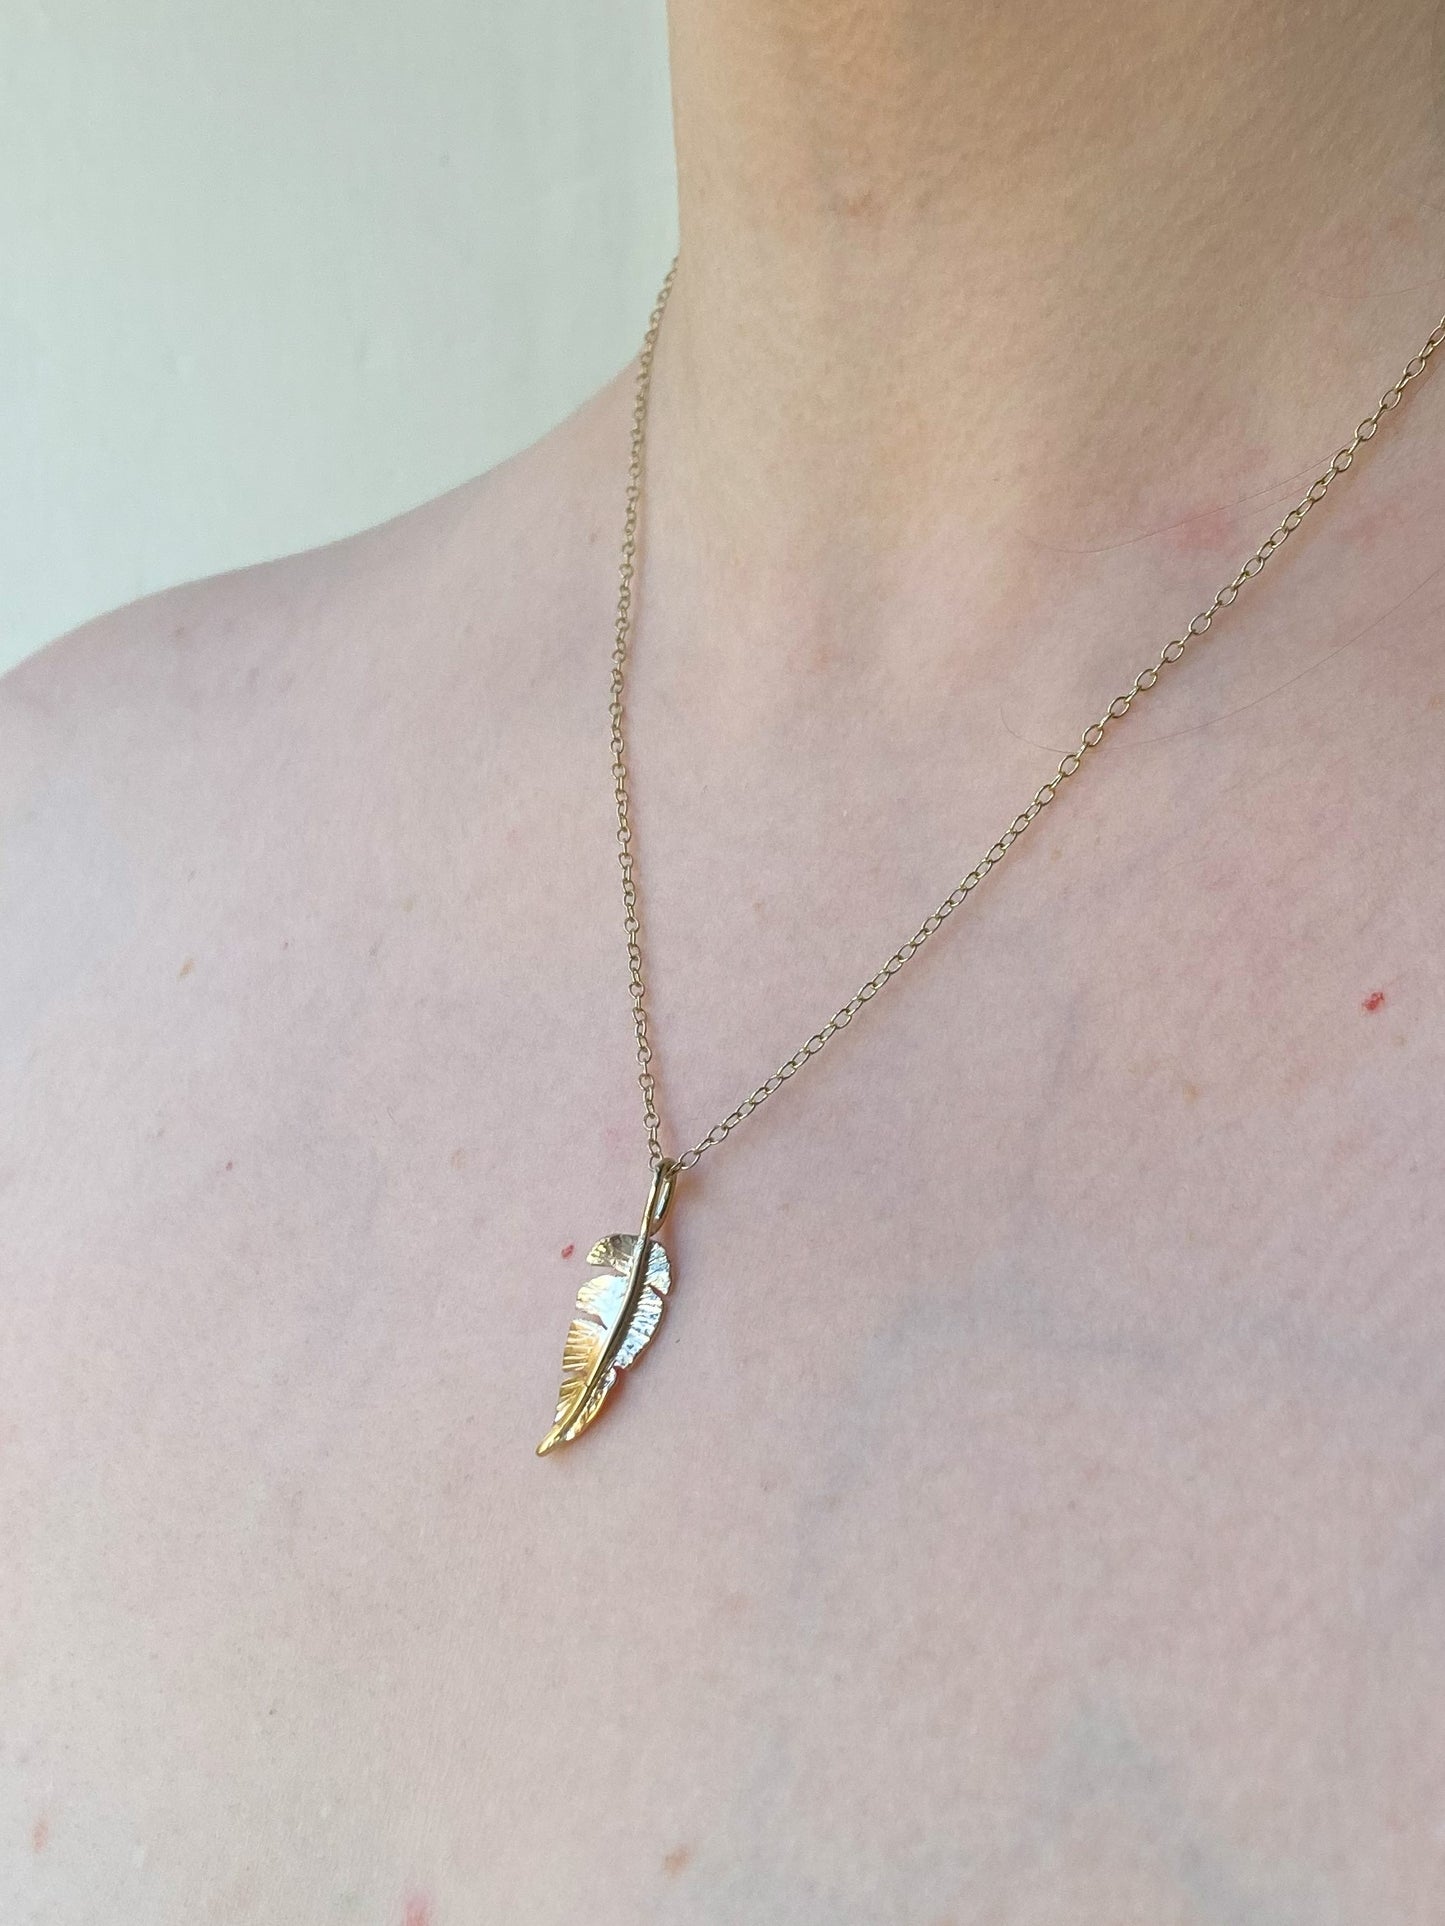 Yellow gold hand forged feather pendant and chain on woman's neck